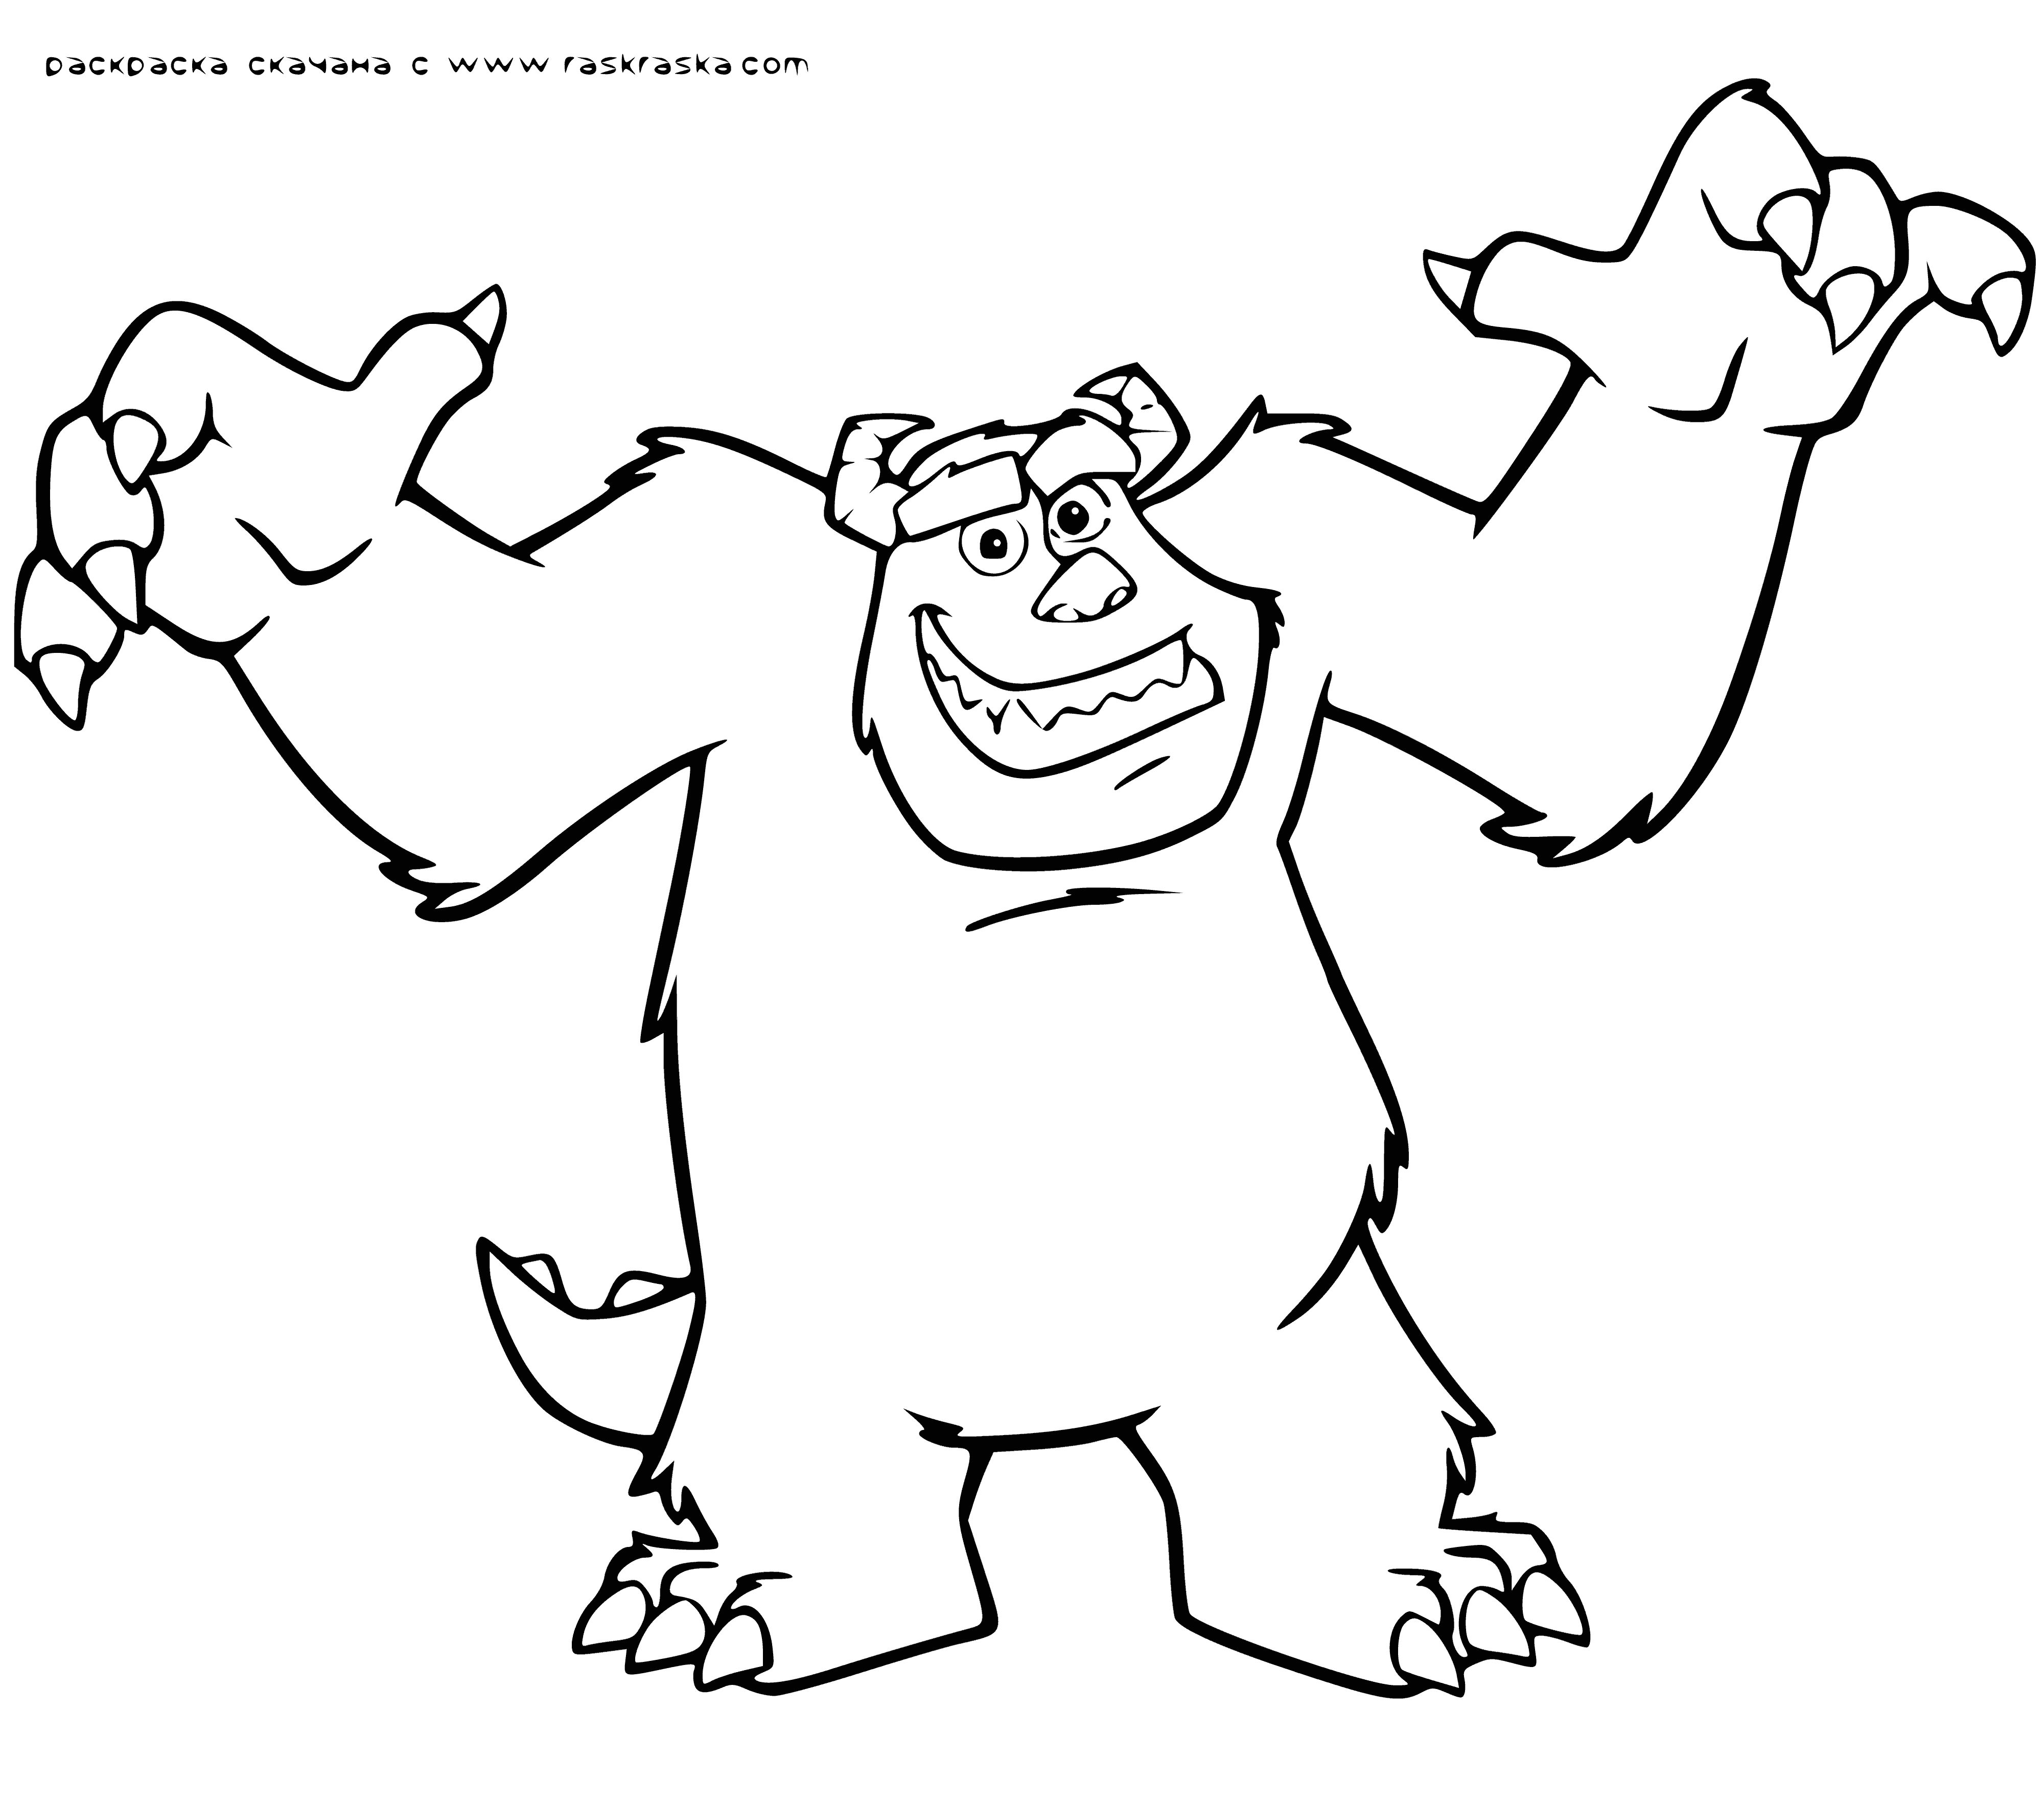 The main thing is to scare! coloring page